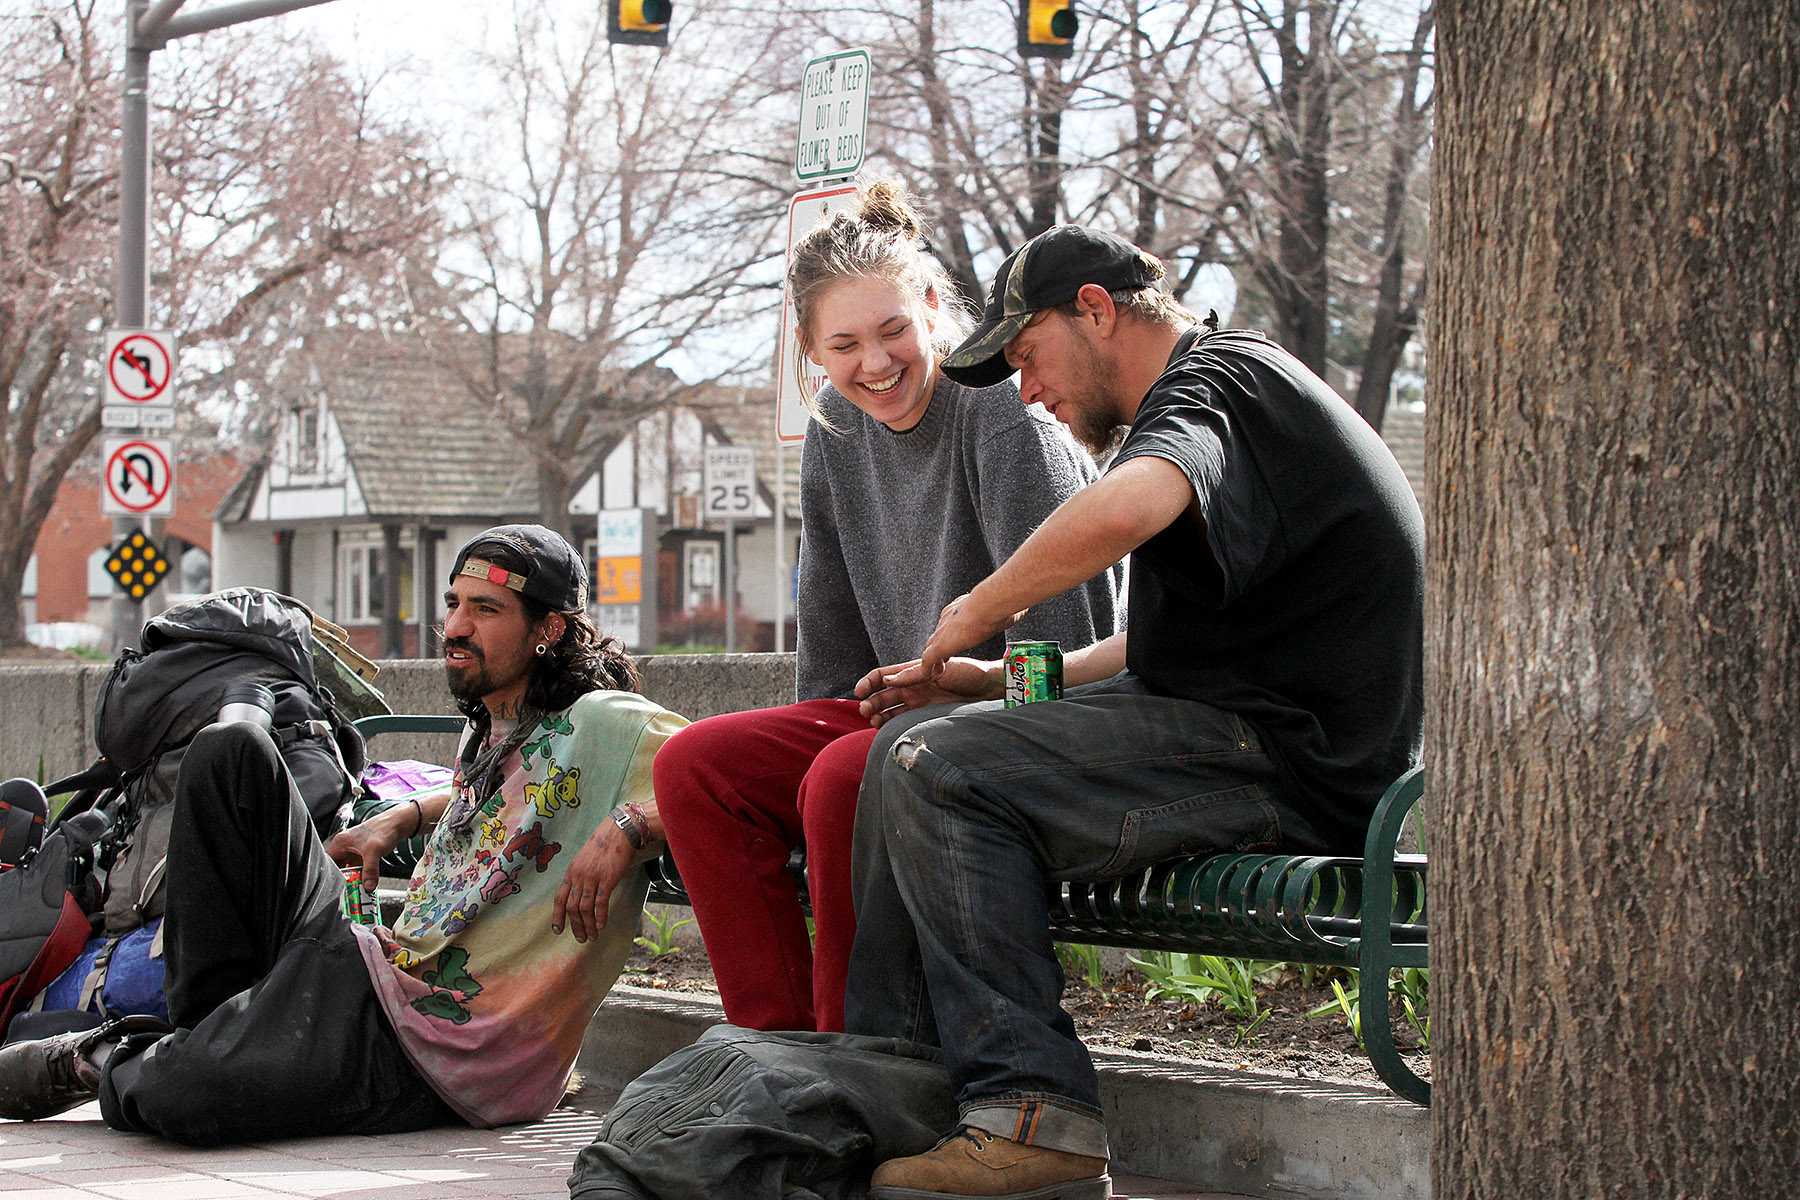 Collegian reporter, Cailley Biagini, talks to two "hobo travelers" named Fishtaco (left) and Beer (right) in Old Town on Friday afternoon. Biagini went undercover for an afternoon to find out how Fort Collins homeless people are treated.